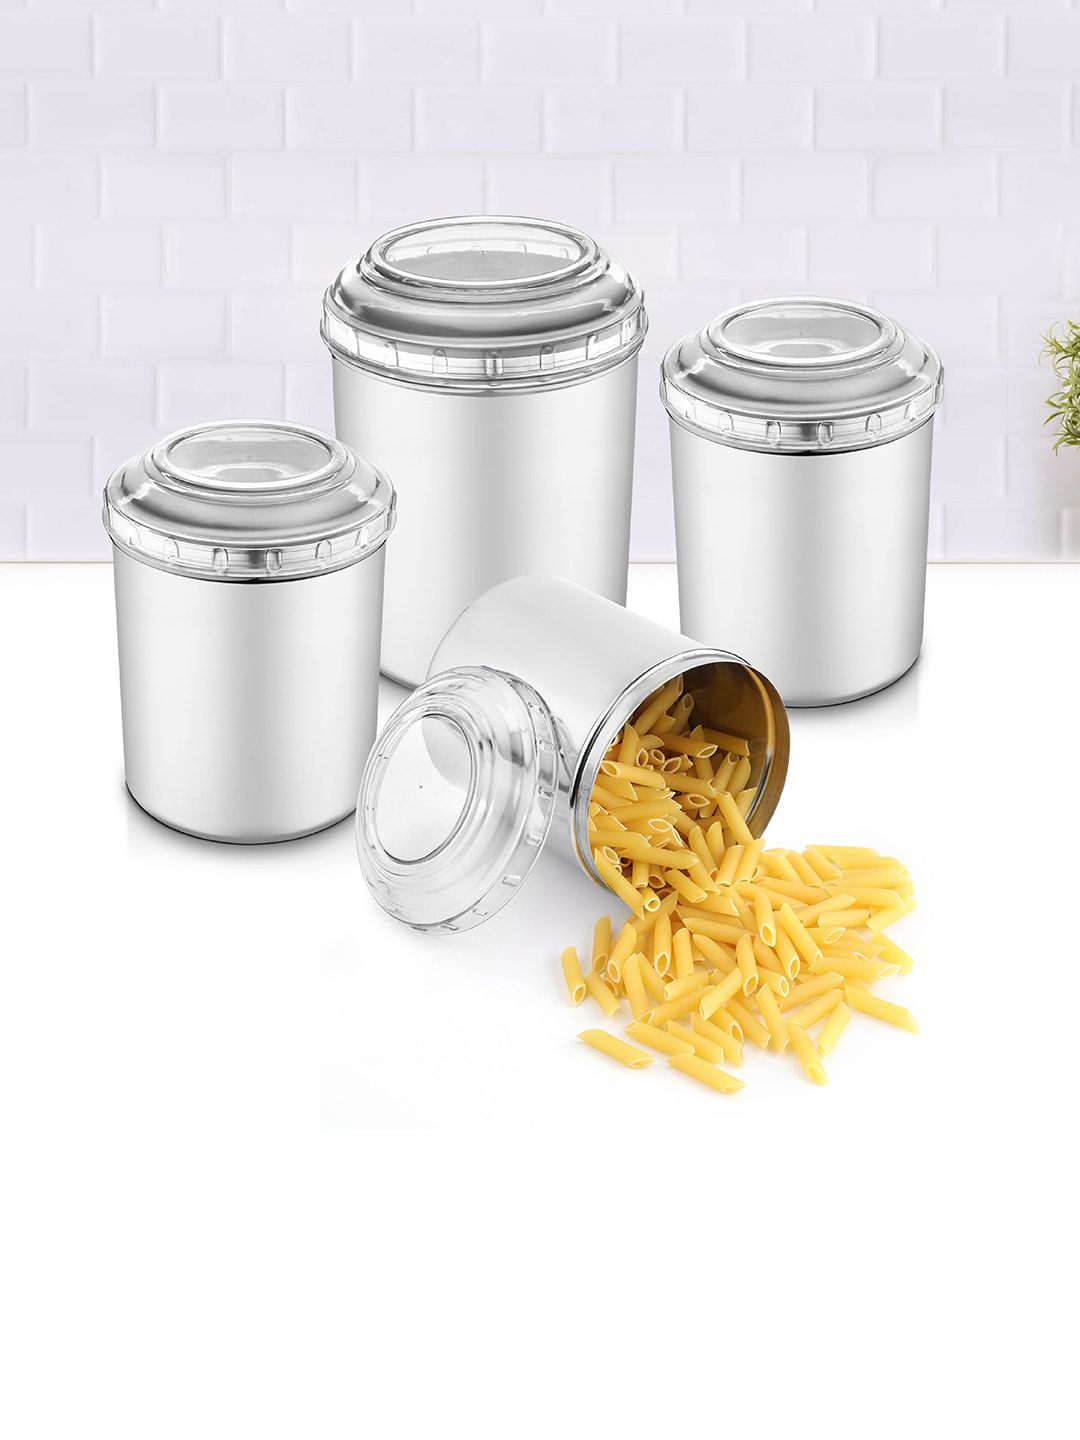 Jensons Set Of 8 Silver-Toned Stainless Steel Canisters Price in India